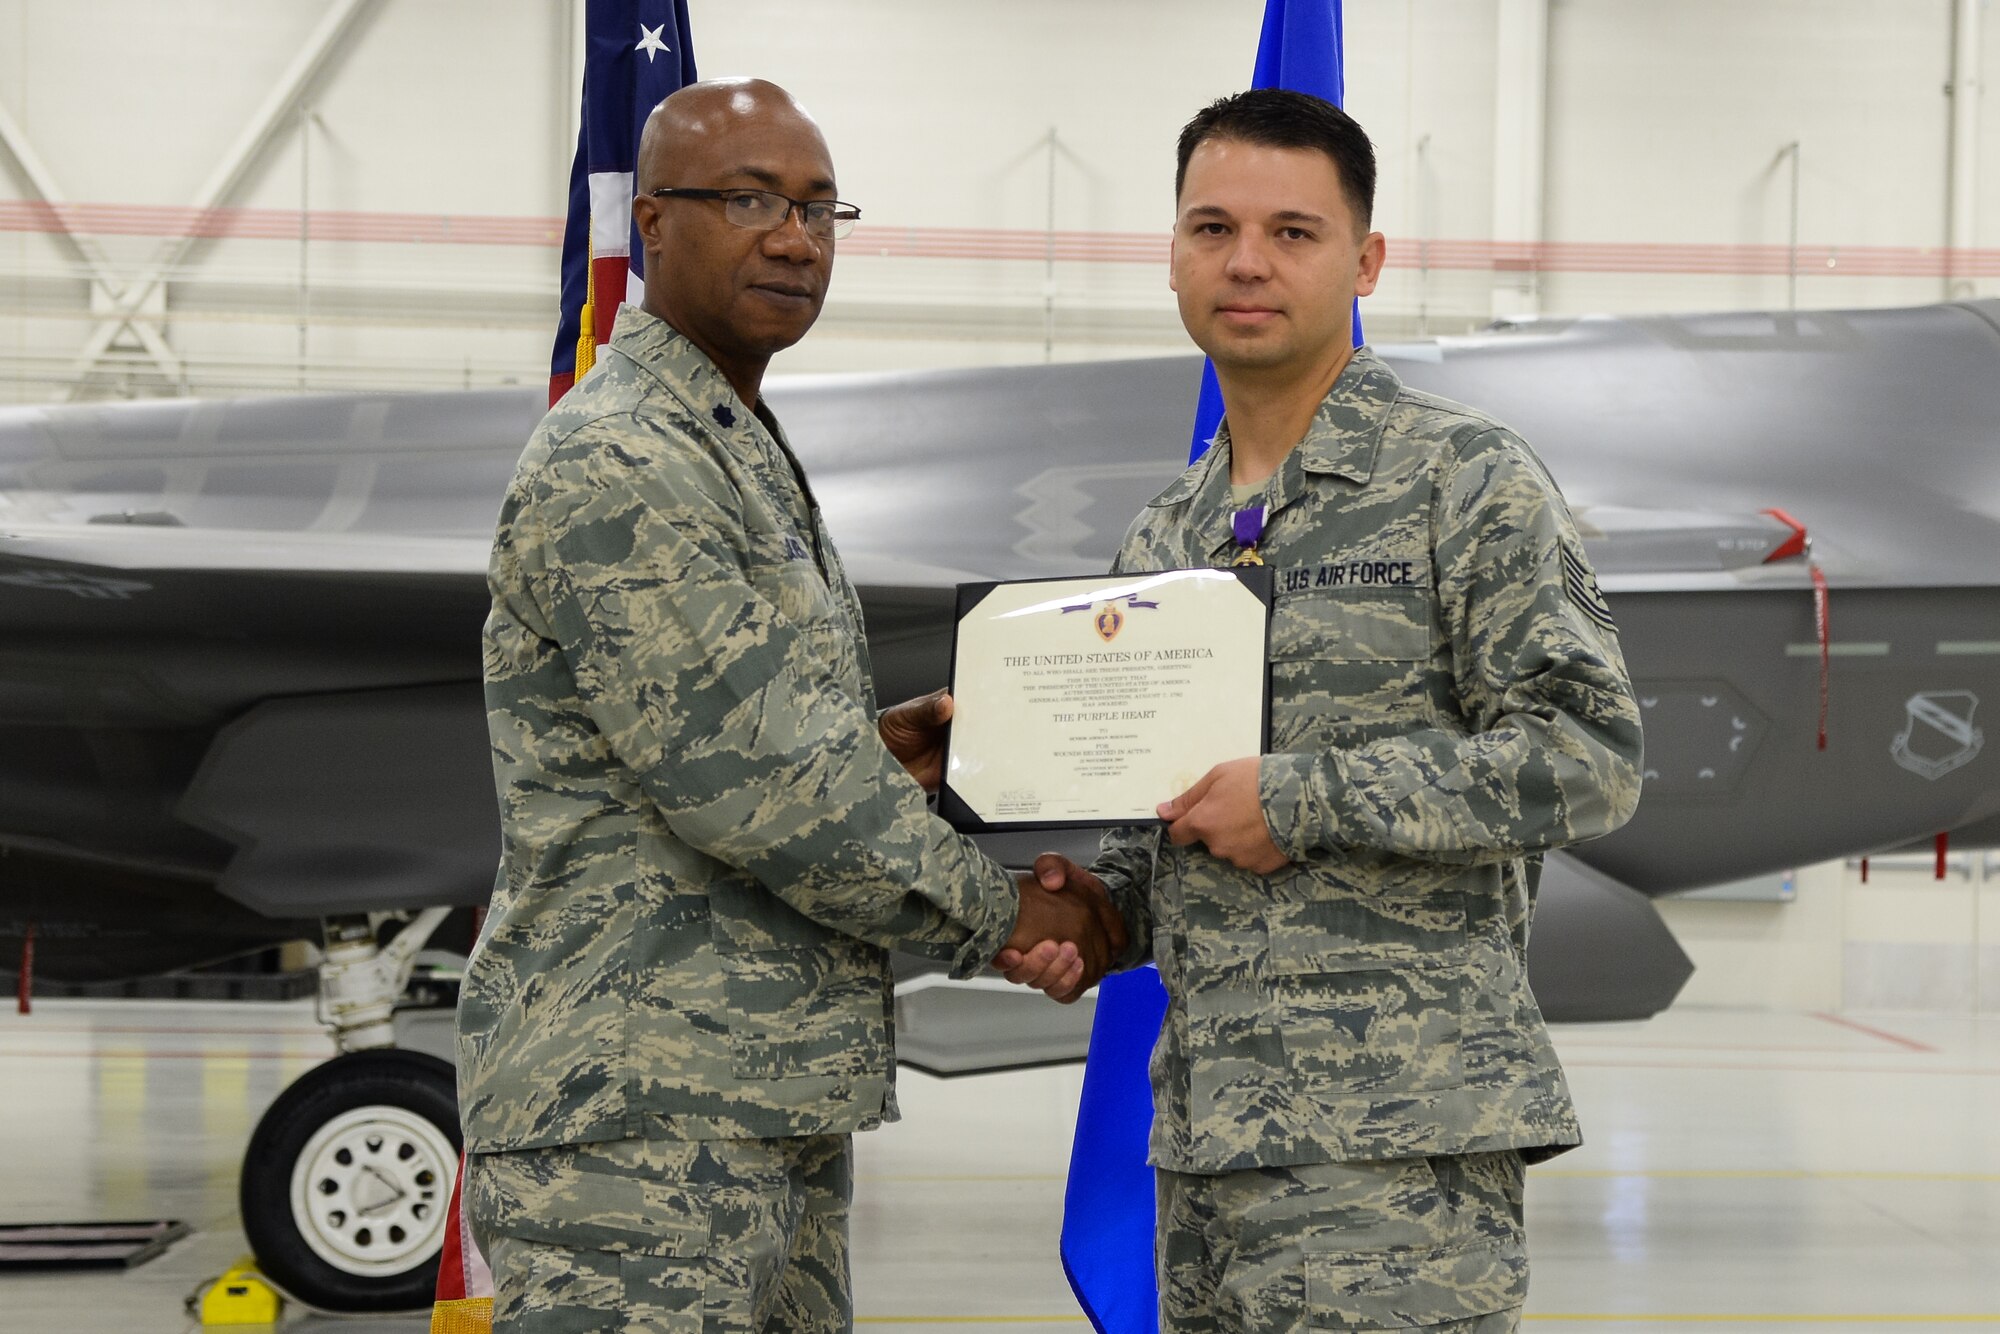 Electronic Warfare Specialist Tech Sgt. Jesus Soto receives a Purple Heart from 388th Component Maintenance Sqaudron Commander Lt. Col. Steven Oliver at Hill Air Force Base, Utah, Oct. 30, 2015. Soto was injured in 2005 while deployed with the 1st Security Forces Squadron to Forward Operating Base Speicher near Tikrit, Iraq. While there, he provided security to U.S. convoys and foreign national supply trucks. (U.S. Air Force photo by R. Nial Bradshaw/Released)